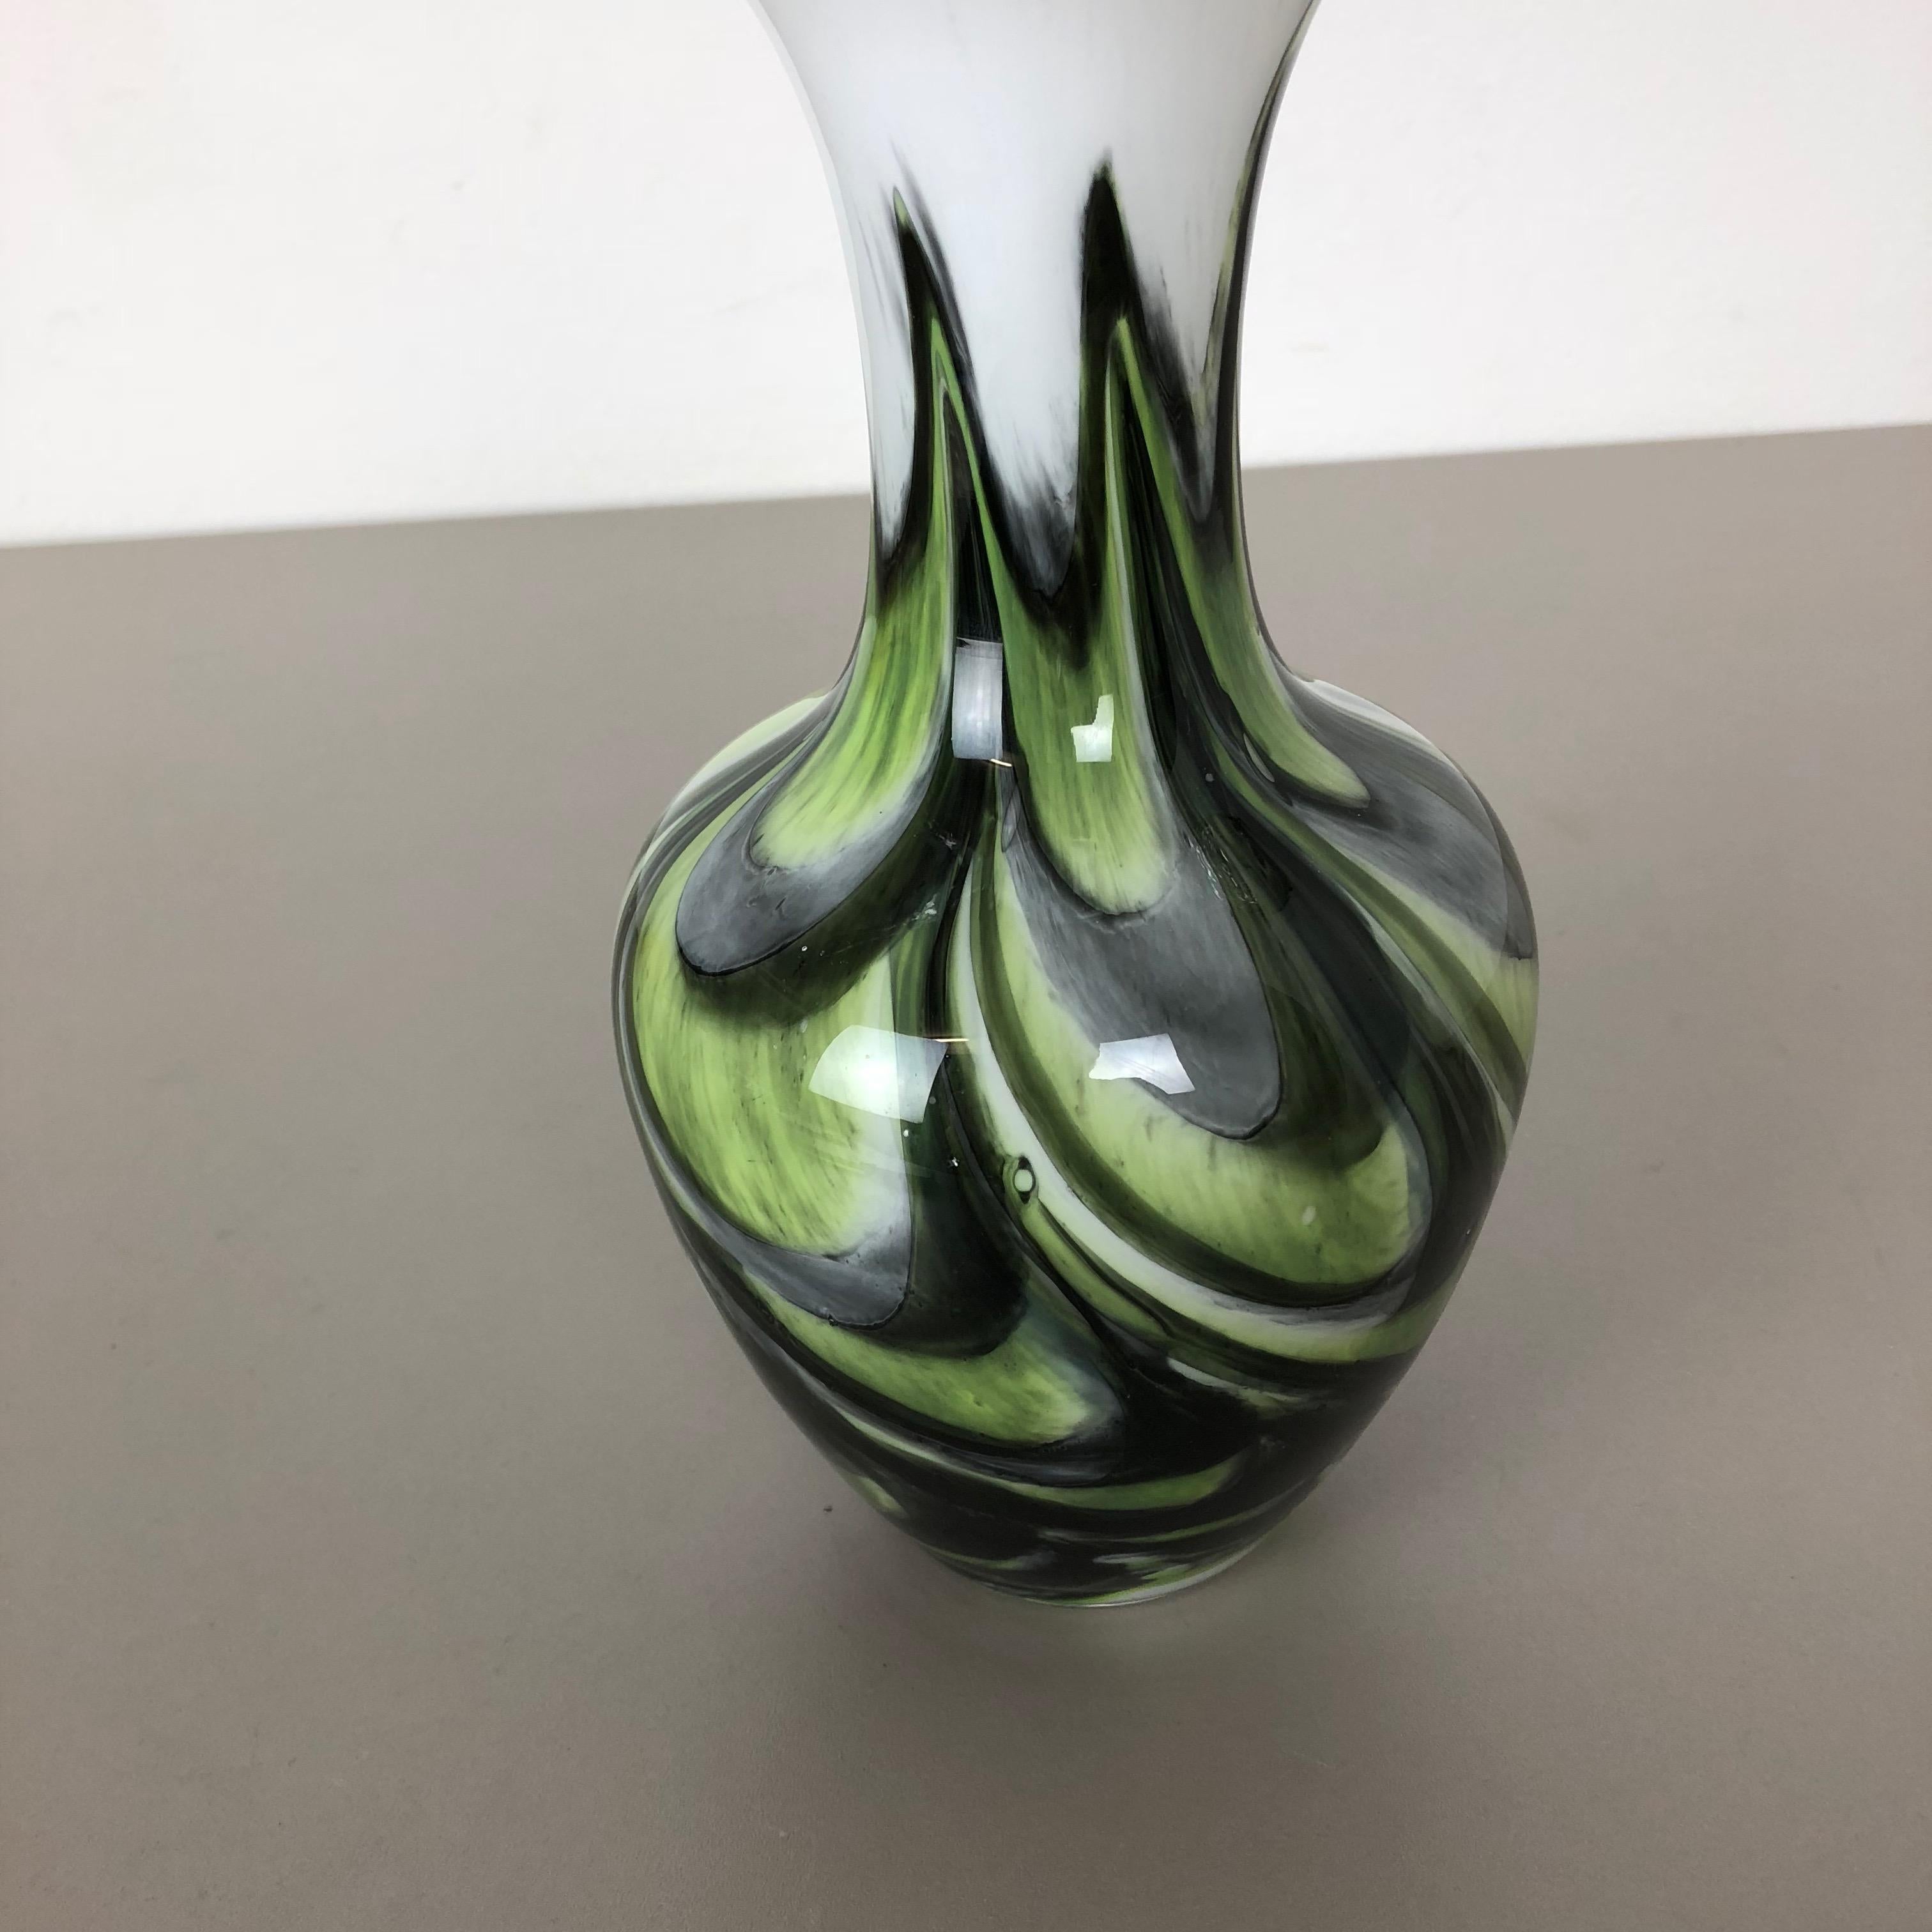 20th Century Rare Extra Large Vintage Pop Art Opaline Florence Glass Vase Design, Italy 1970s For Sale